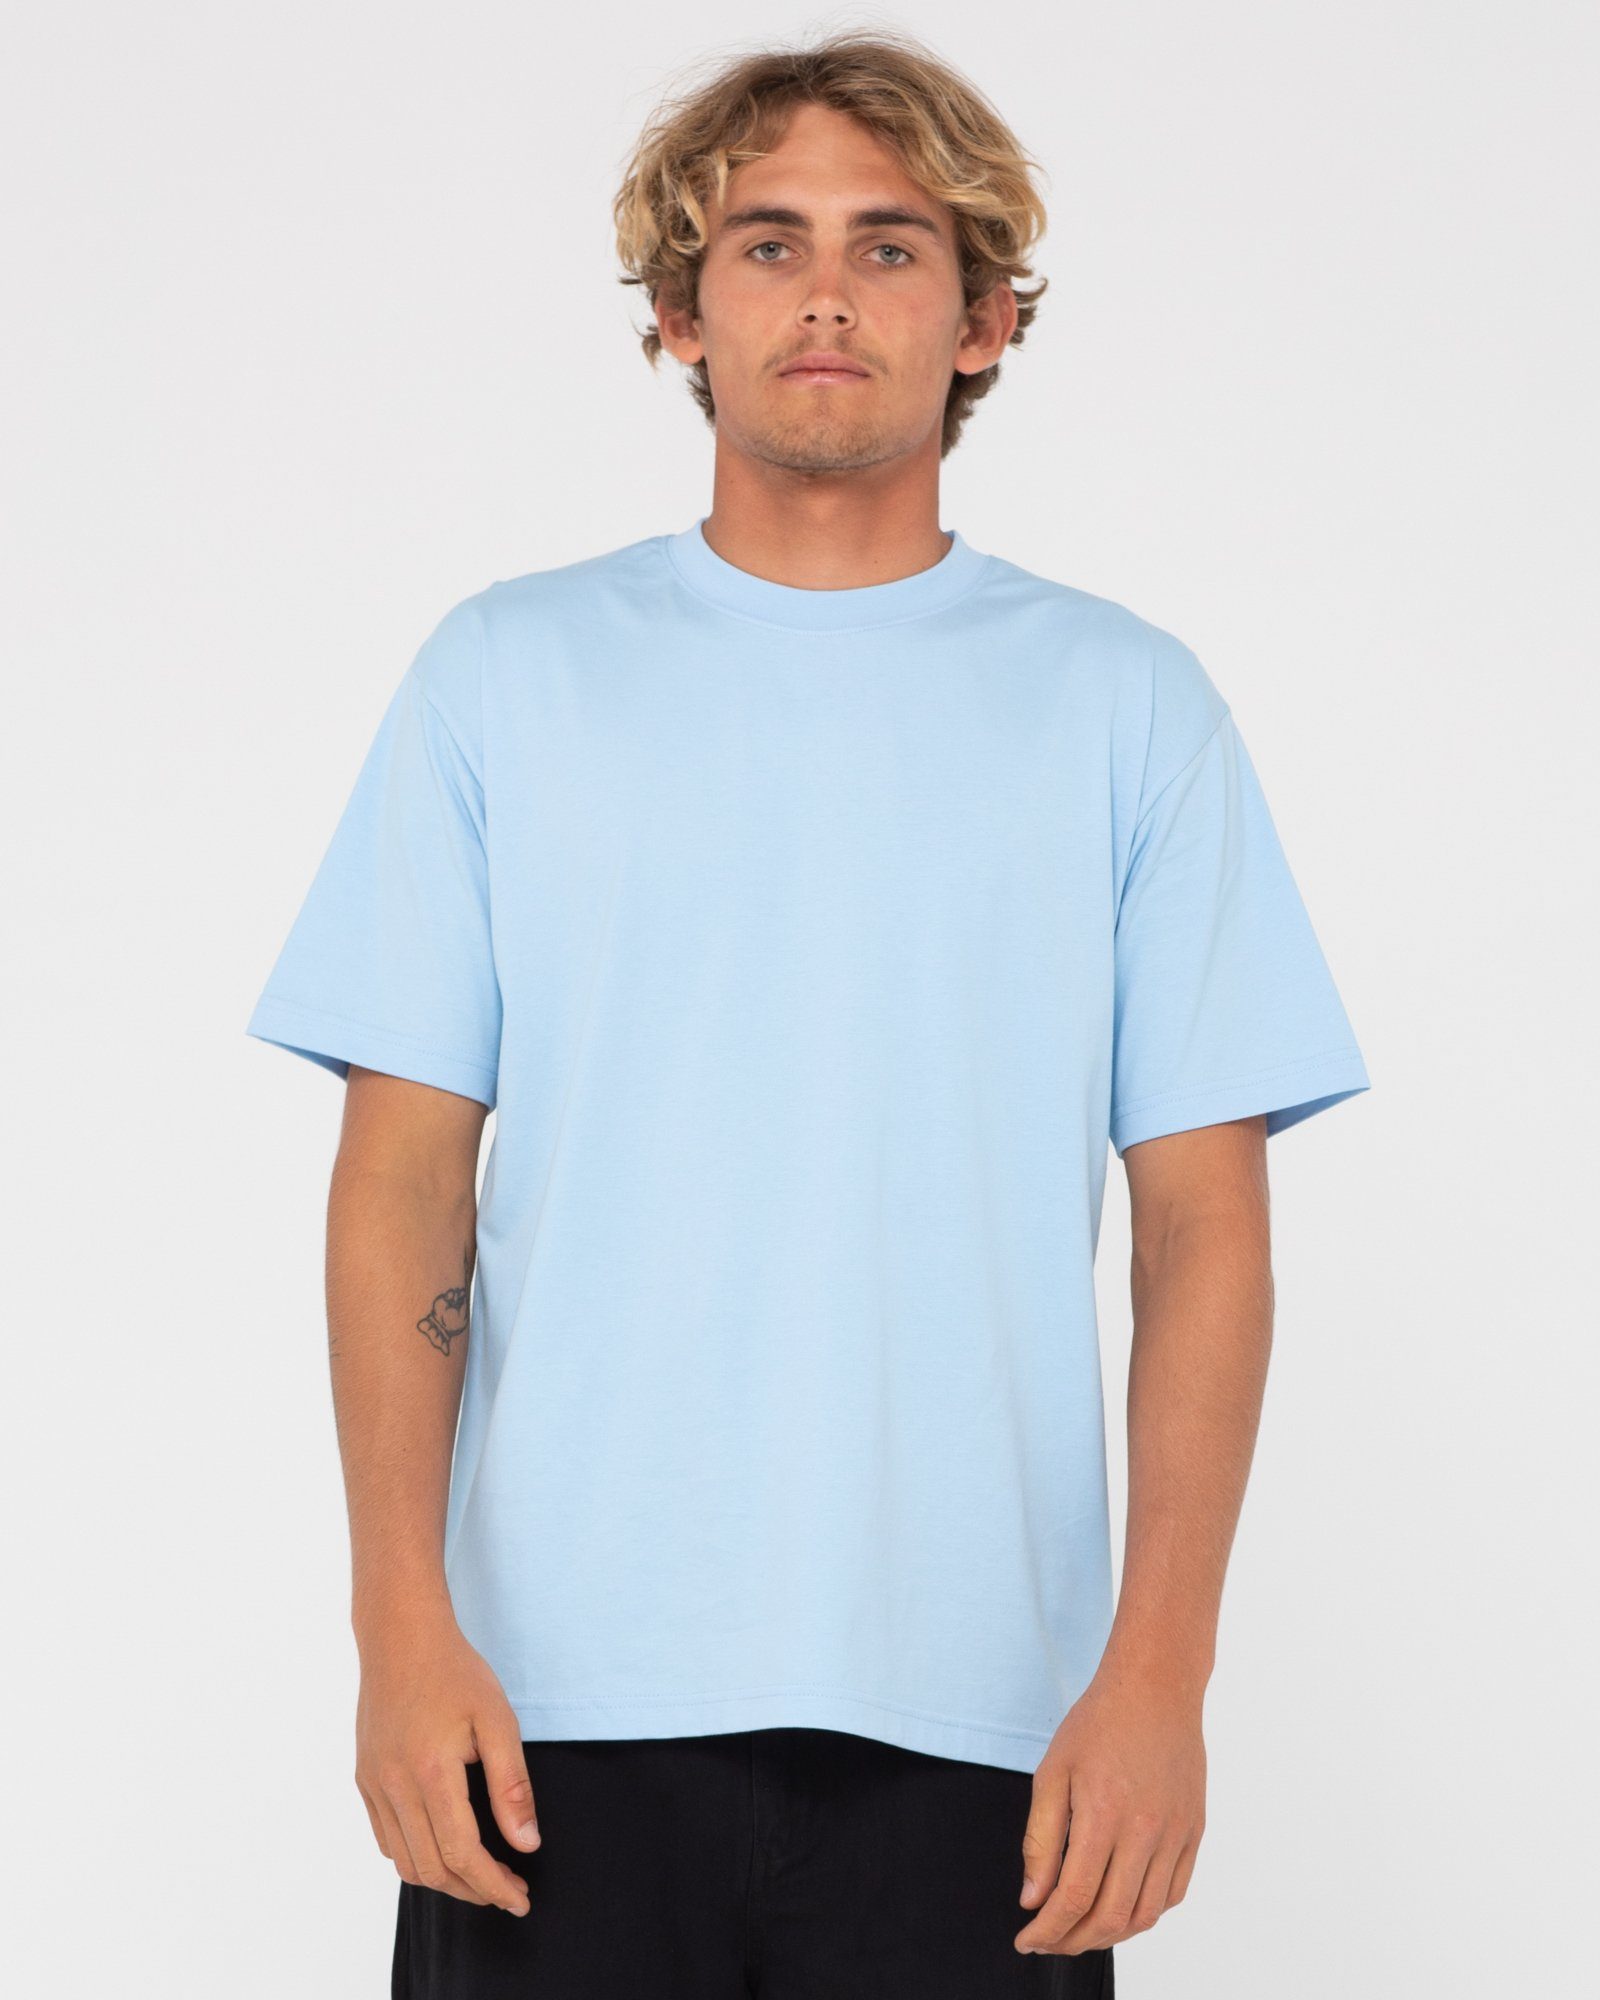 TEE BLUE T-Shirt PASTEL DELUXE Rusty S/S BLANK